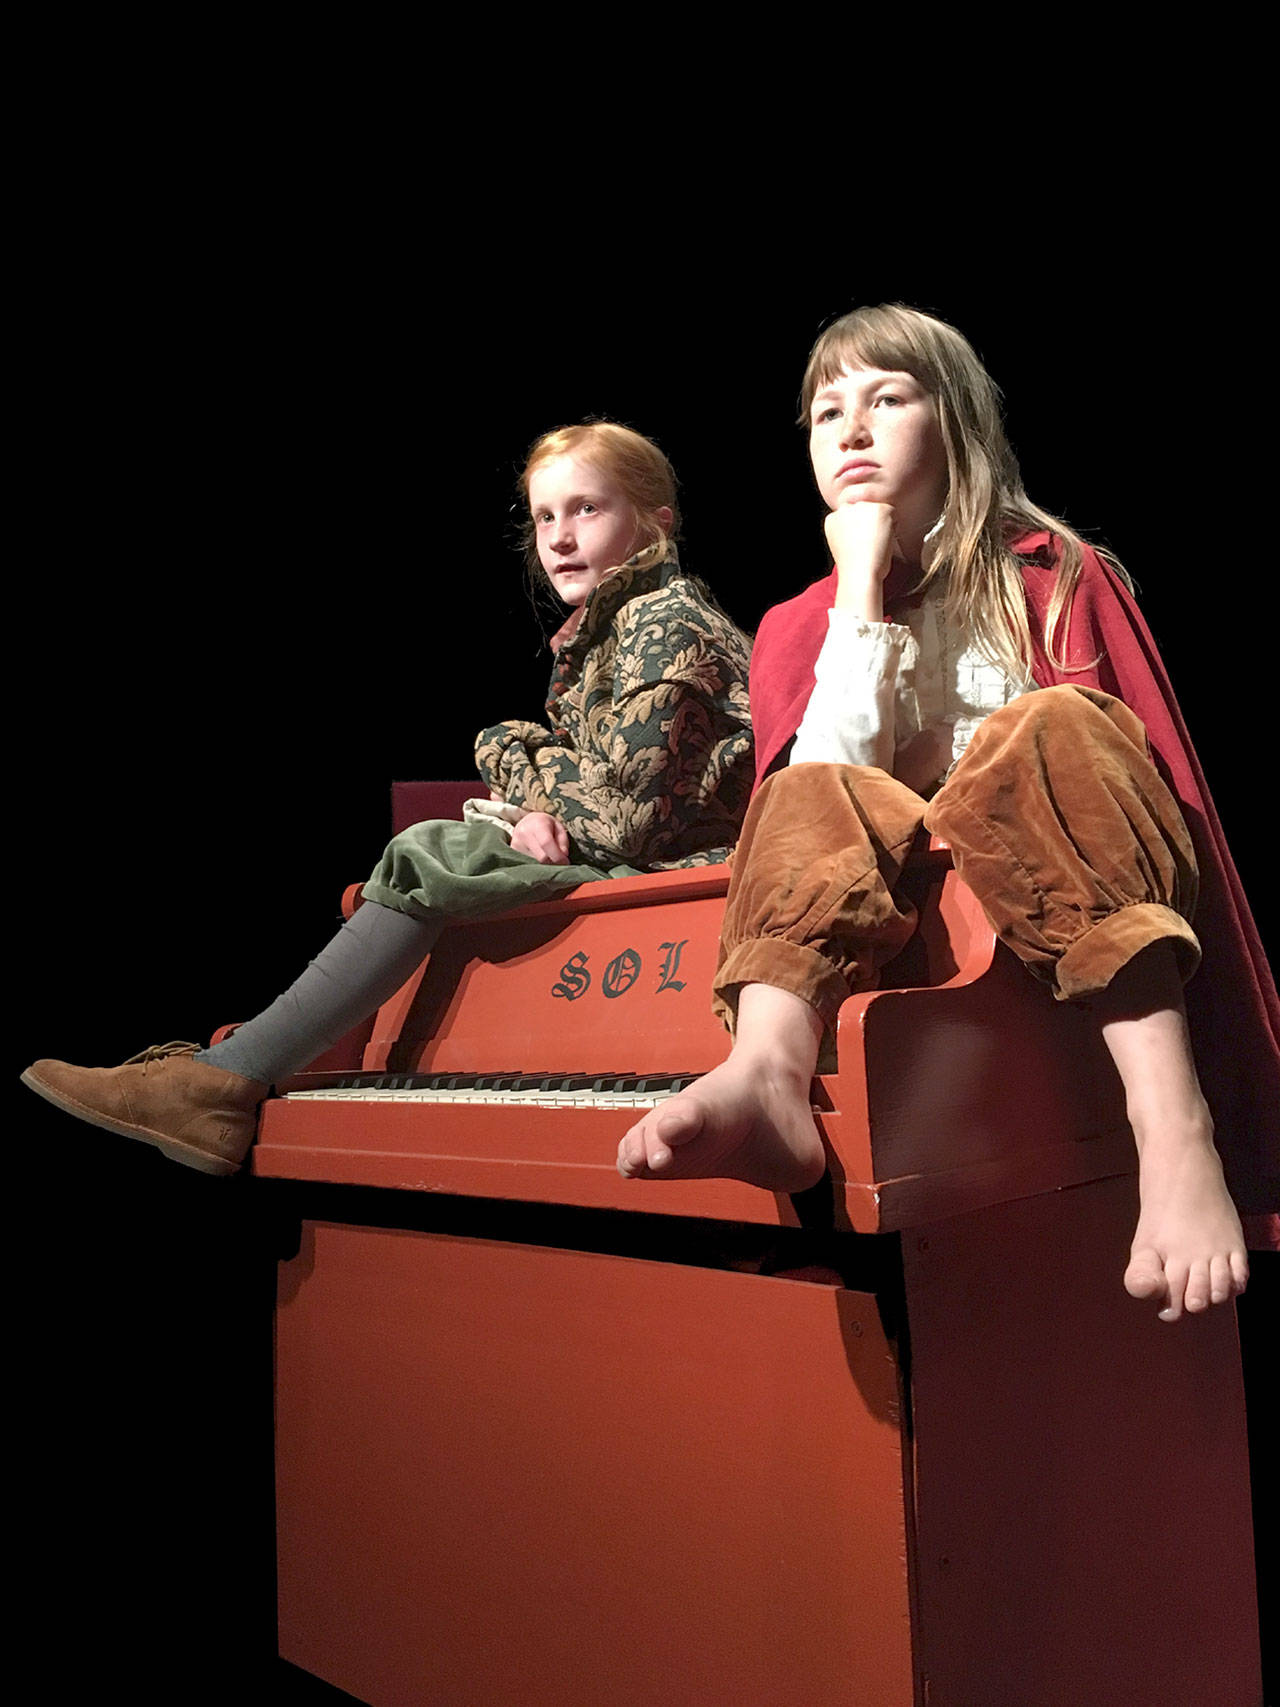 Anora Kuzma and Kaylee Klebanow are shown in a scene from “When You Tell the Moon About Gravity,” which runs this weekend at The Chameleon Theater in Port Townsend. (Sophie Pipia)